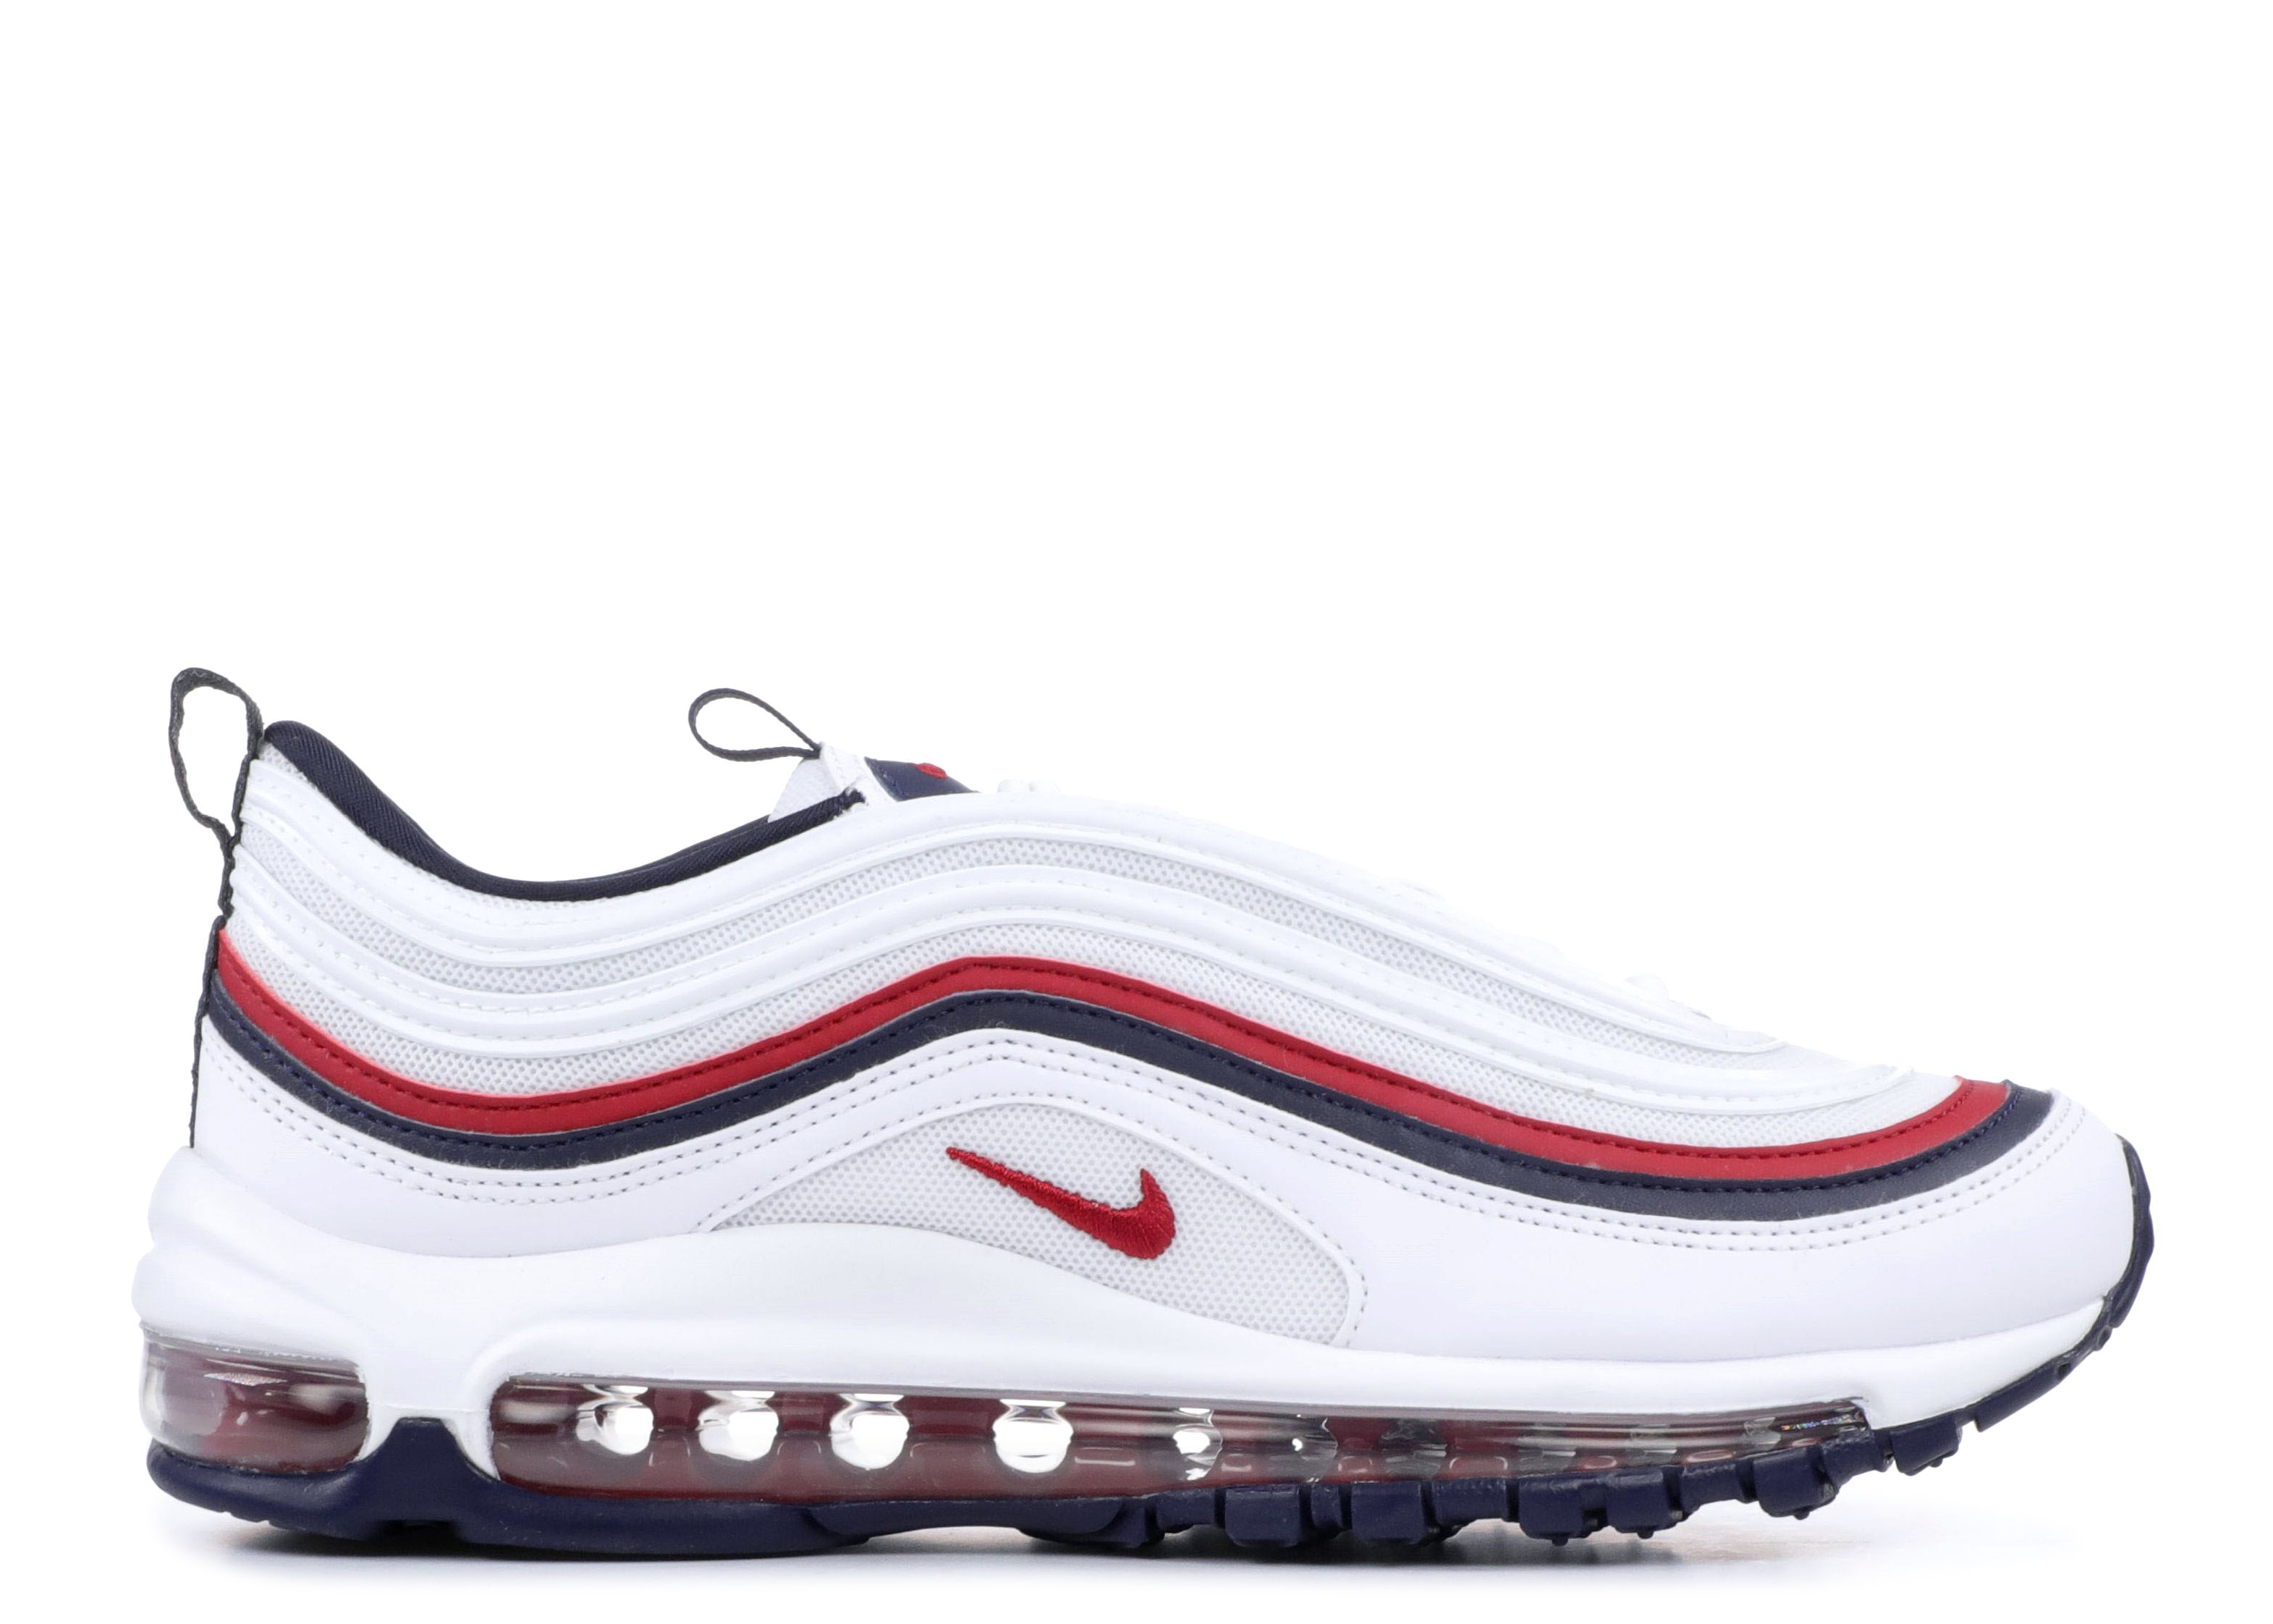 red and white air max 97s